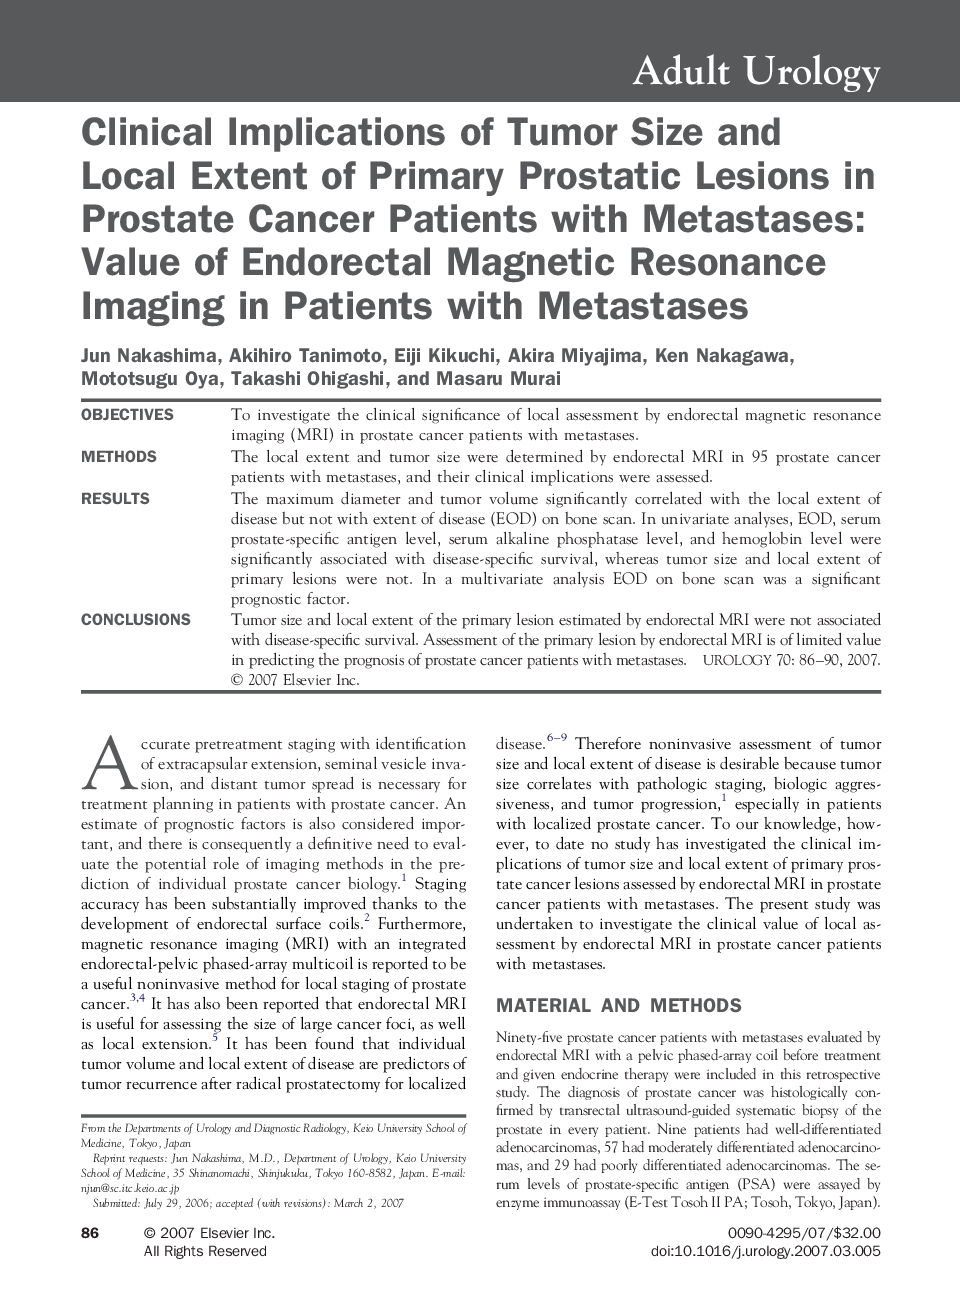 Clinical Implications of Tumor Size and Local Extent of Primary Prostatic Lesions in Prostate Cancer Patients with Metastases: Value of Endorectal Magnetic Resonance Imaging in Patients with Metastases